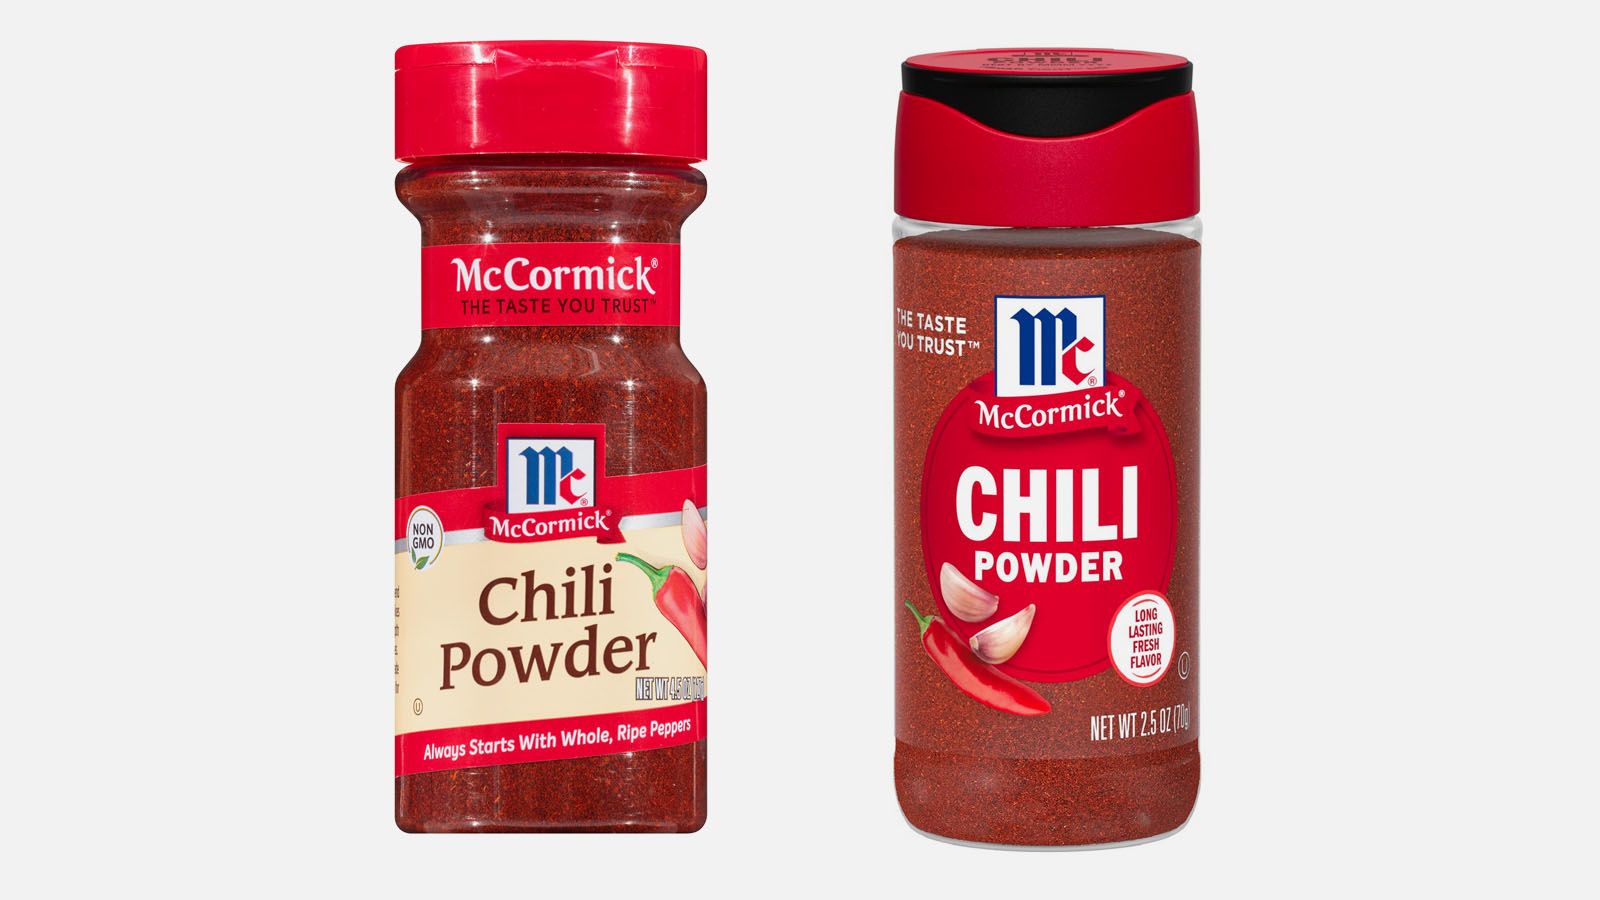 McCormick's red-cap bottles are getting a makeover